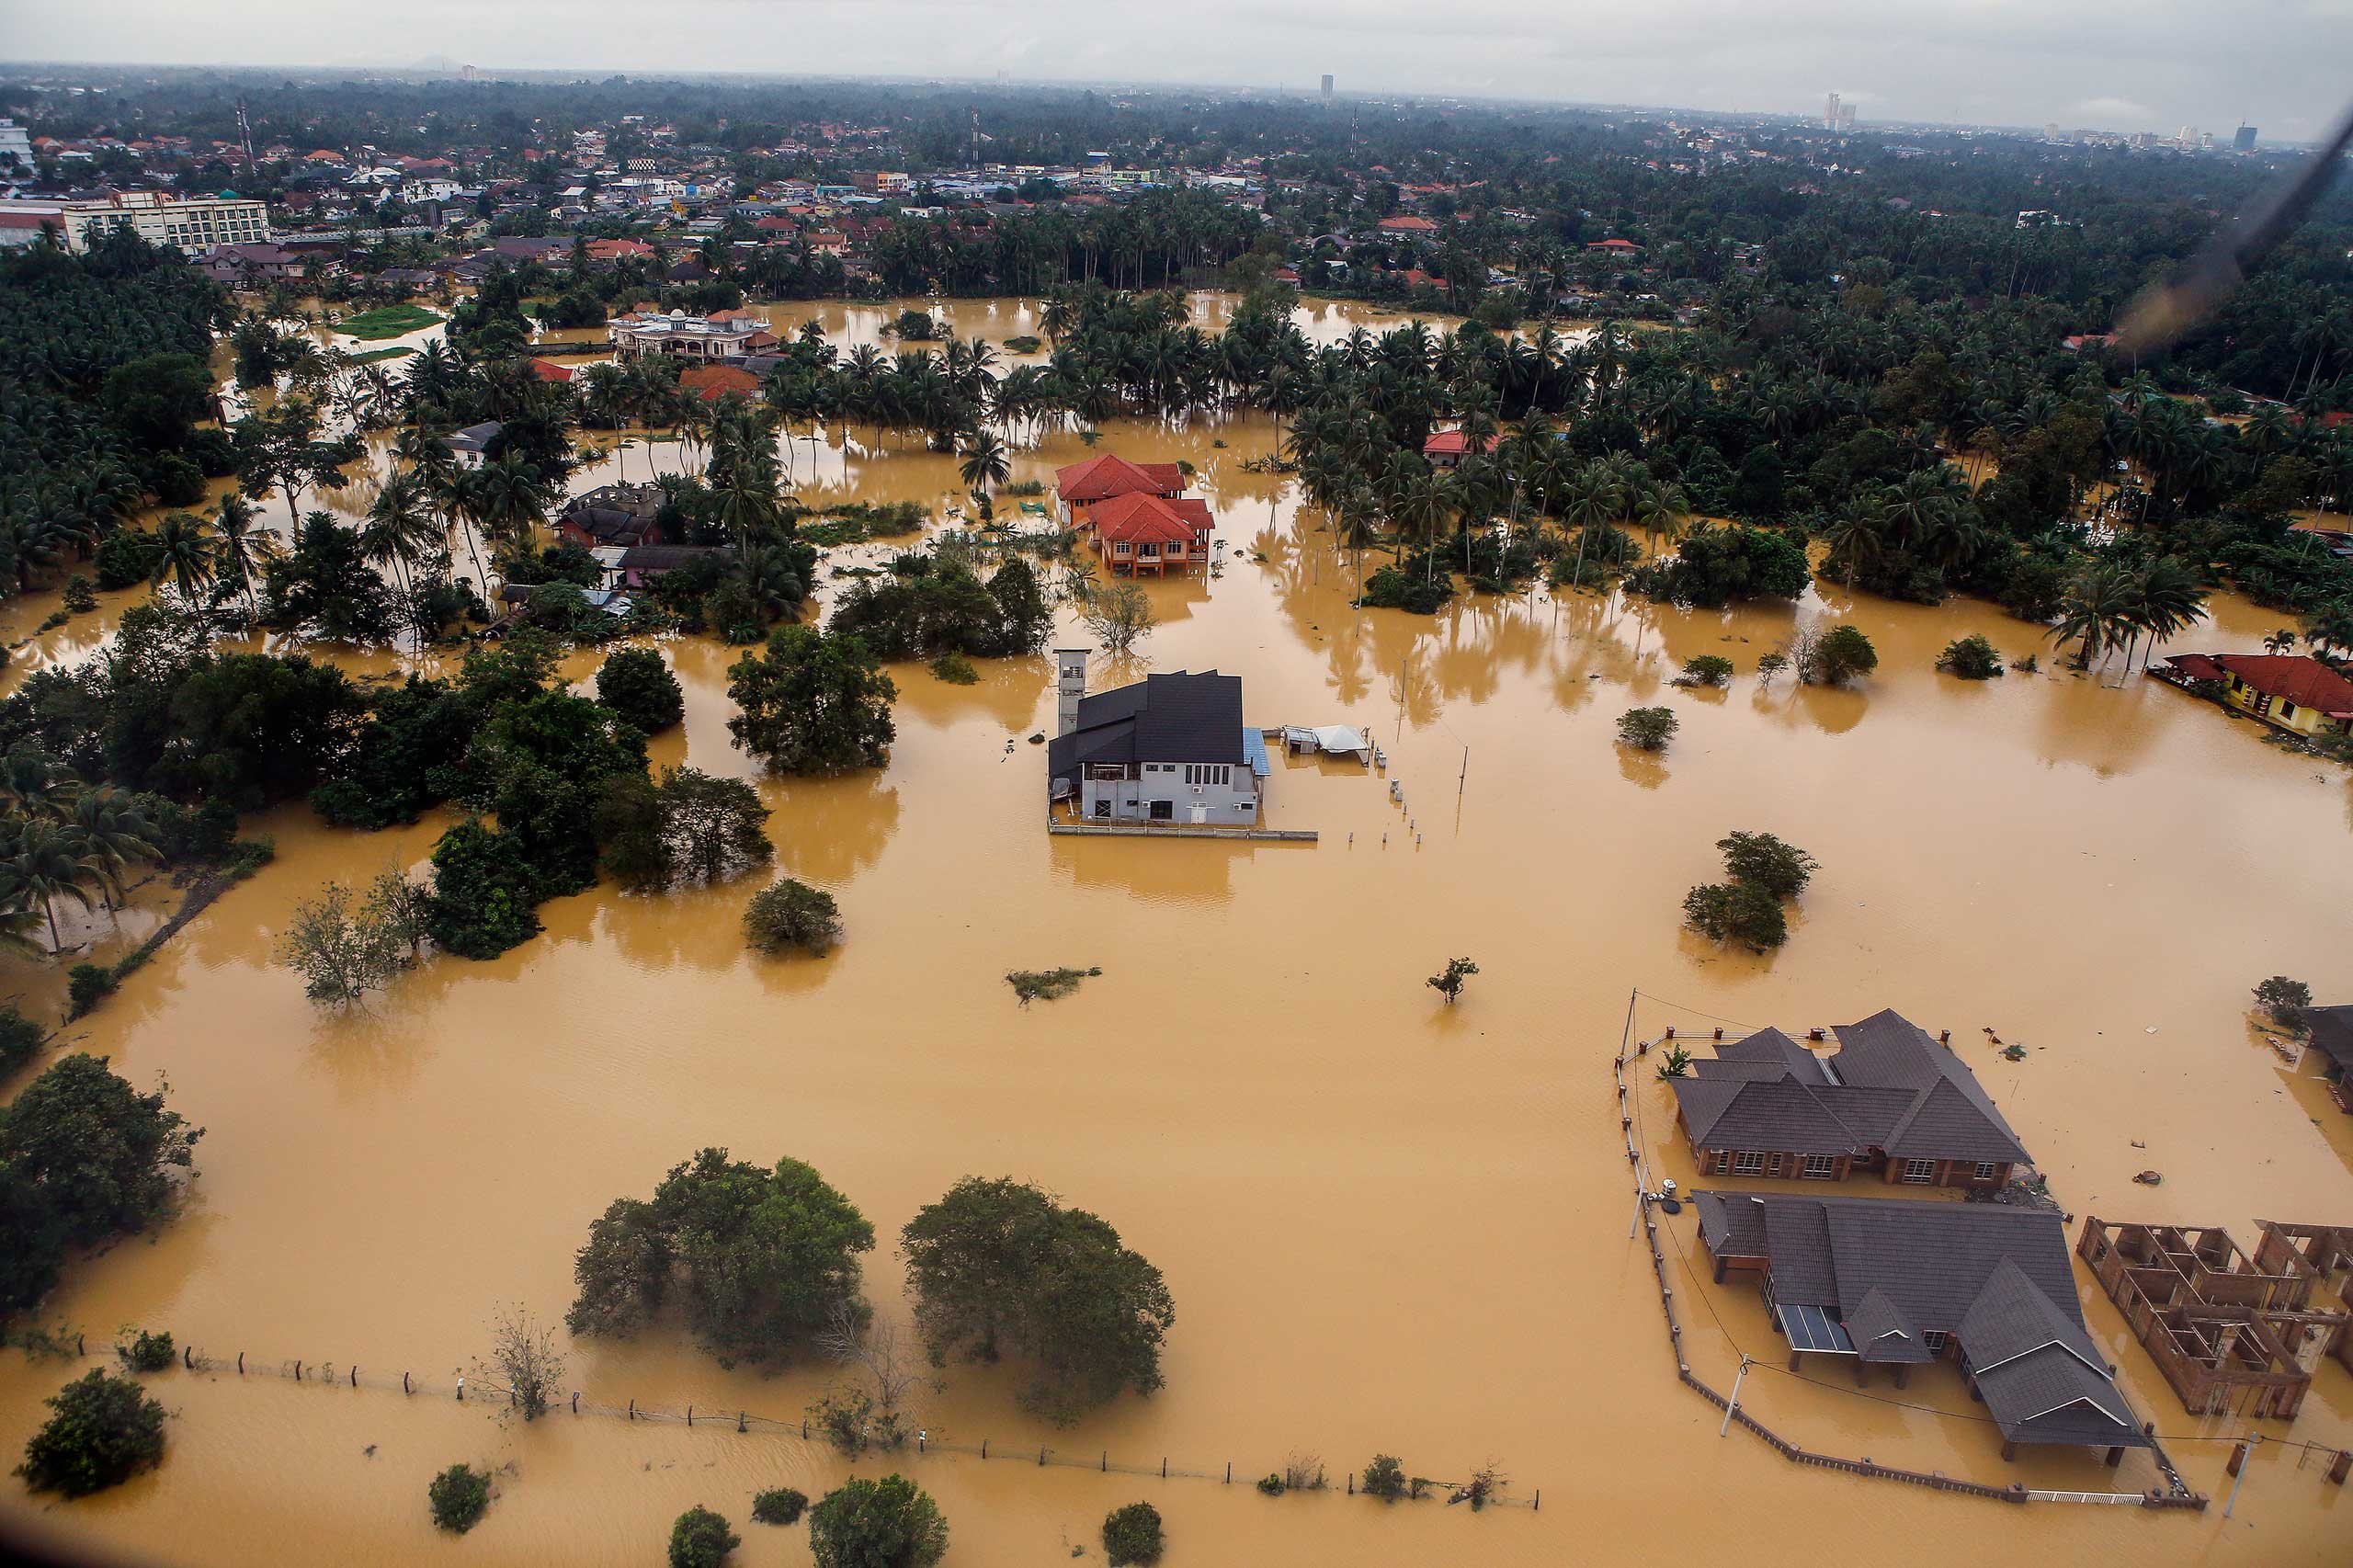 An aerial view of a settlement submerged by floodwaters in the Pengkalan Chepa district of Kelantan, Malaysia, Dec. 28, 2014. (Azhar Rahim—EPA)